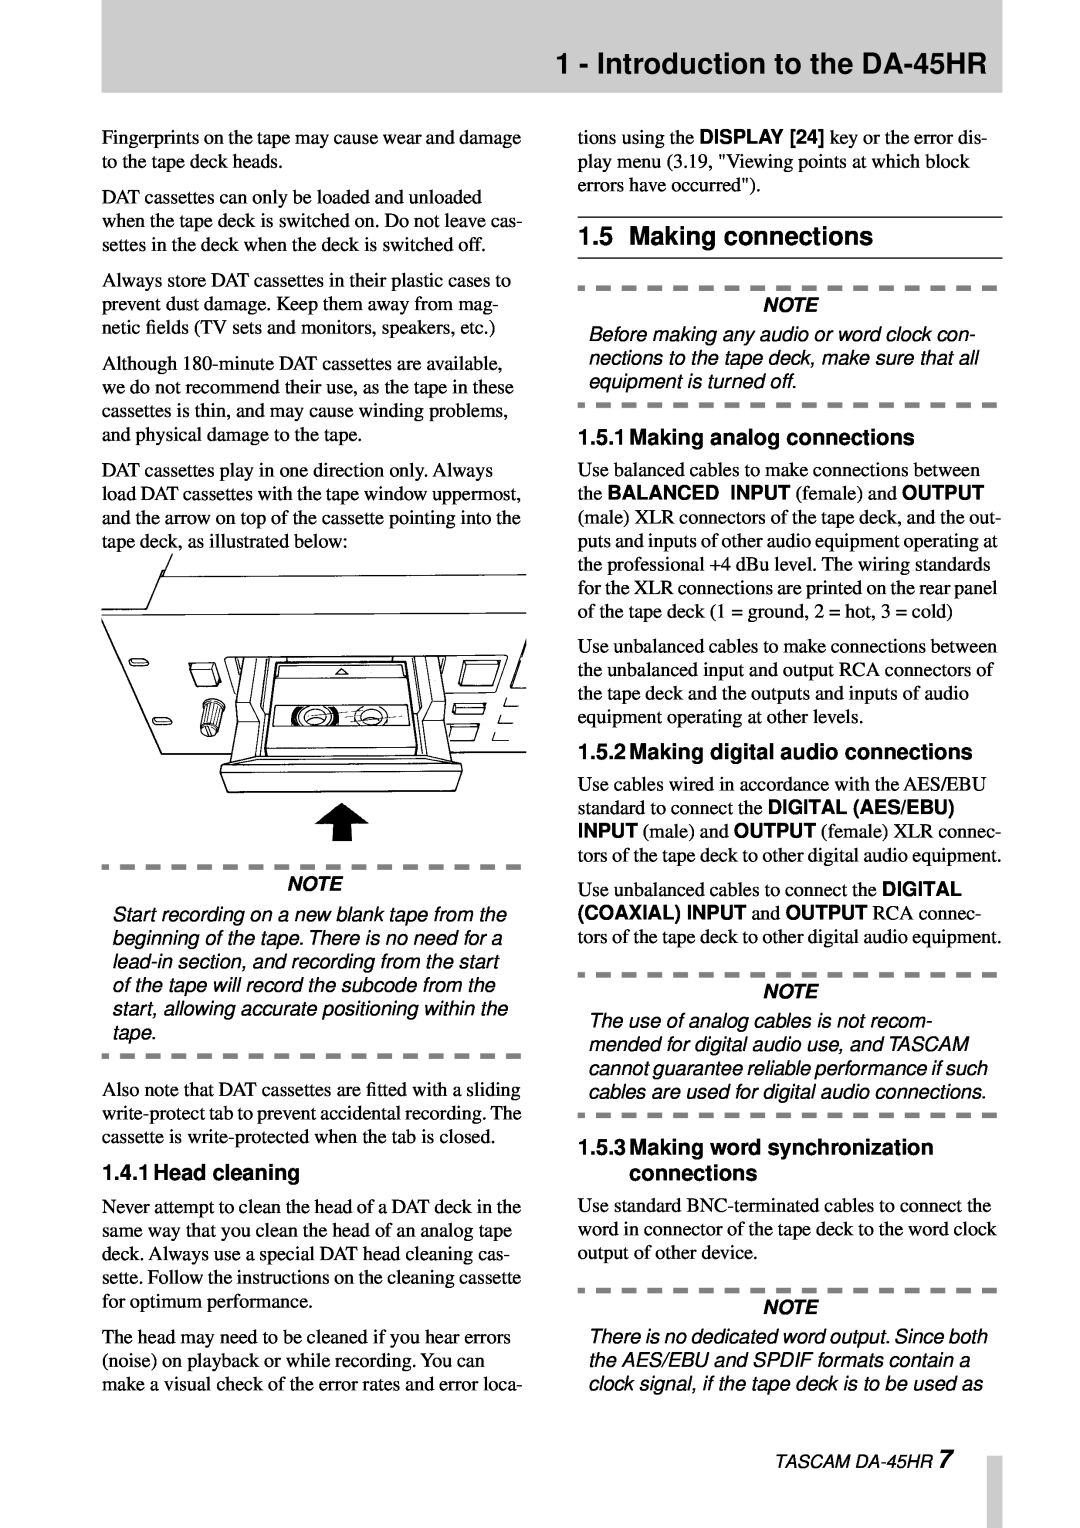 Tascam DA-45HR owner manual Making connections, Head cleaning, Making analog connections, Making digital audio connections 